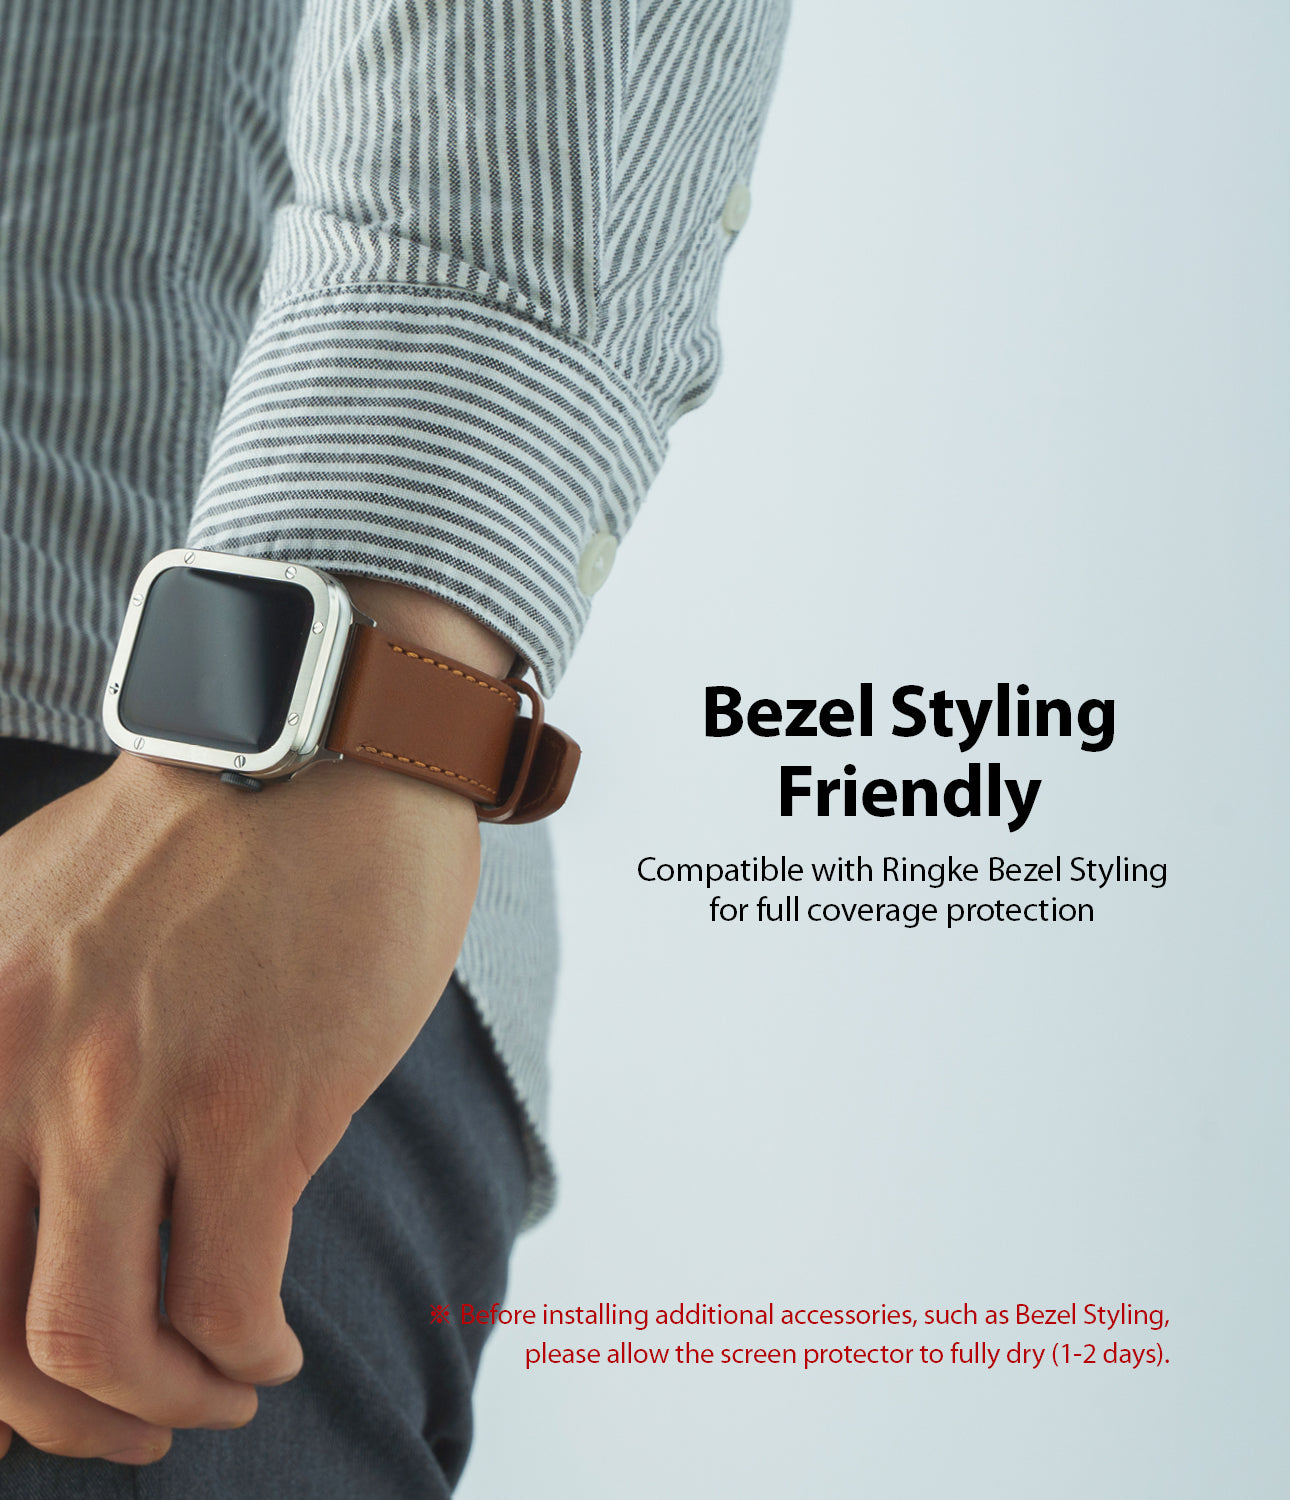 bezel styling friendly : compatible with ringke bezel styling for full coverage protection